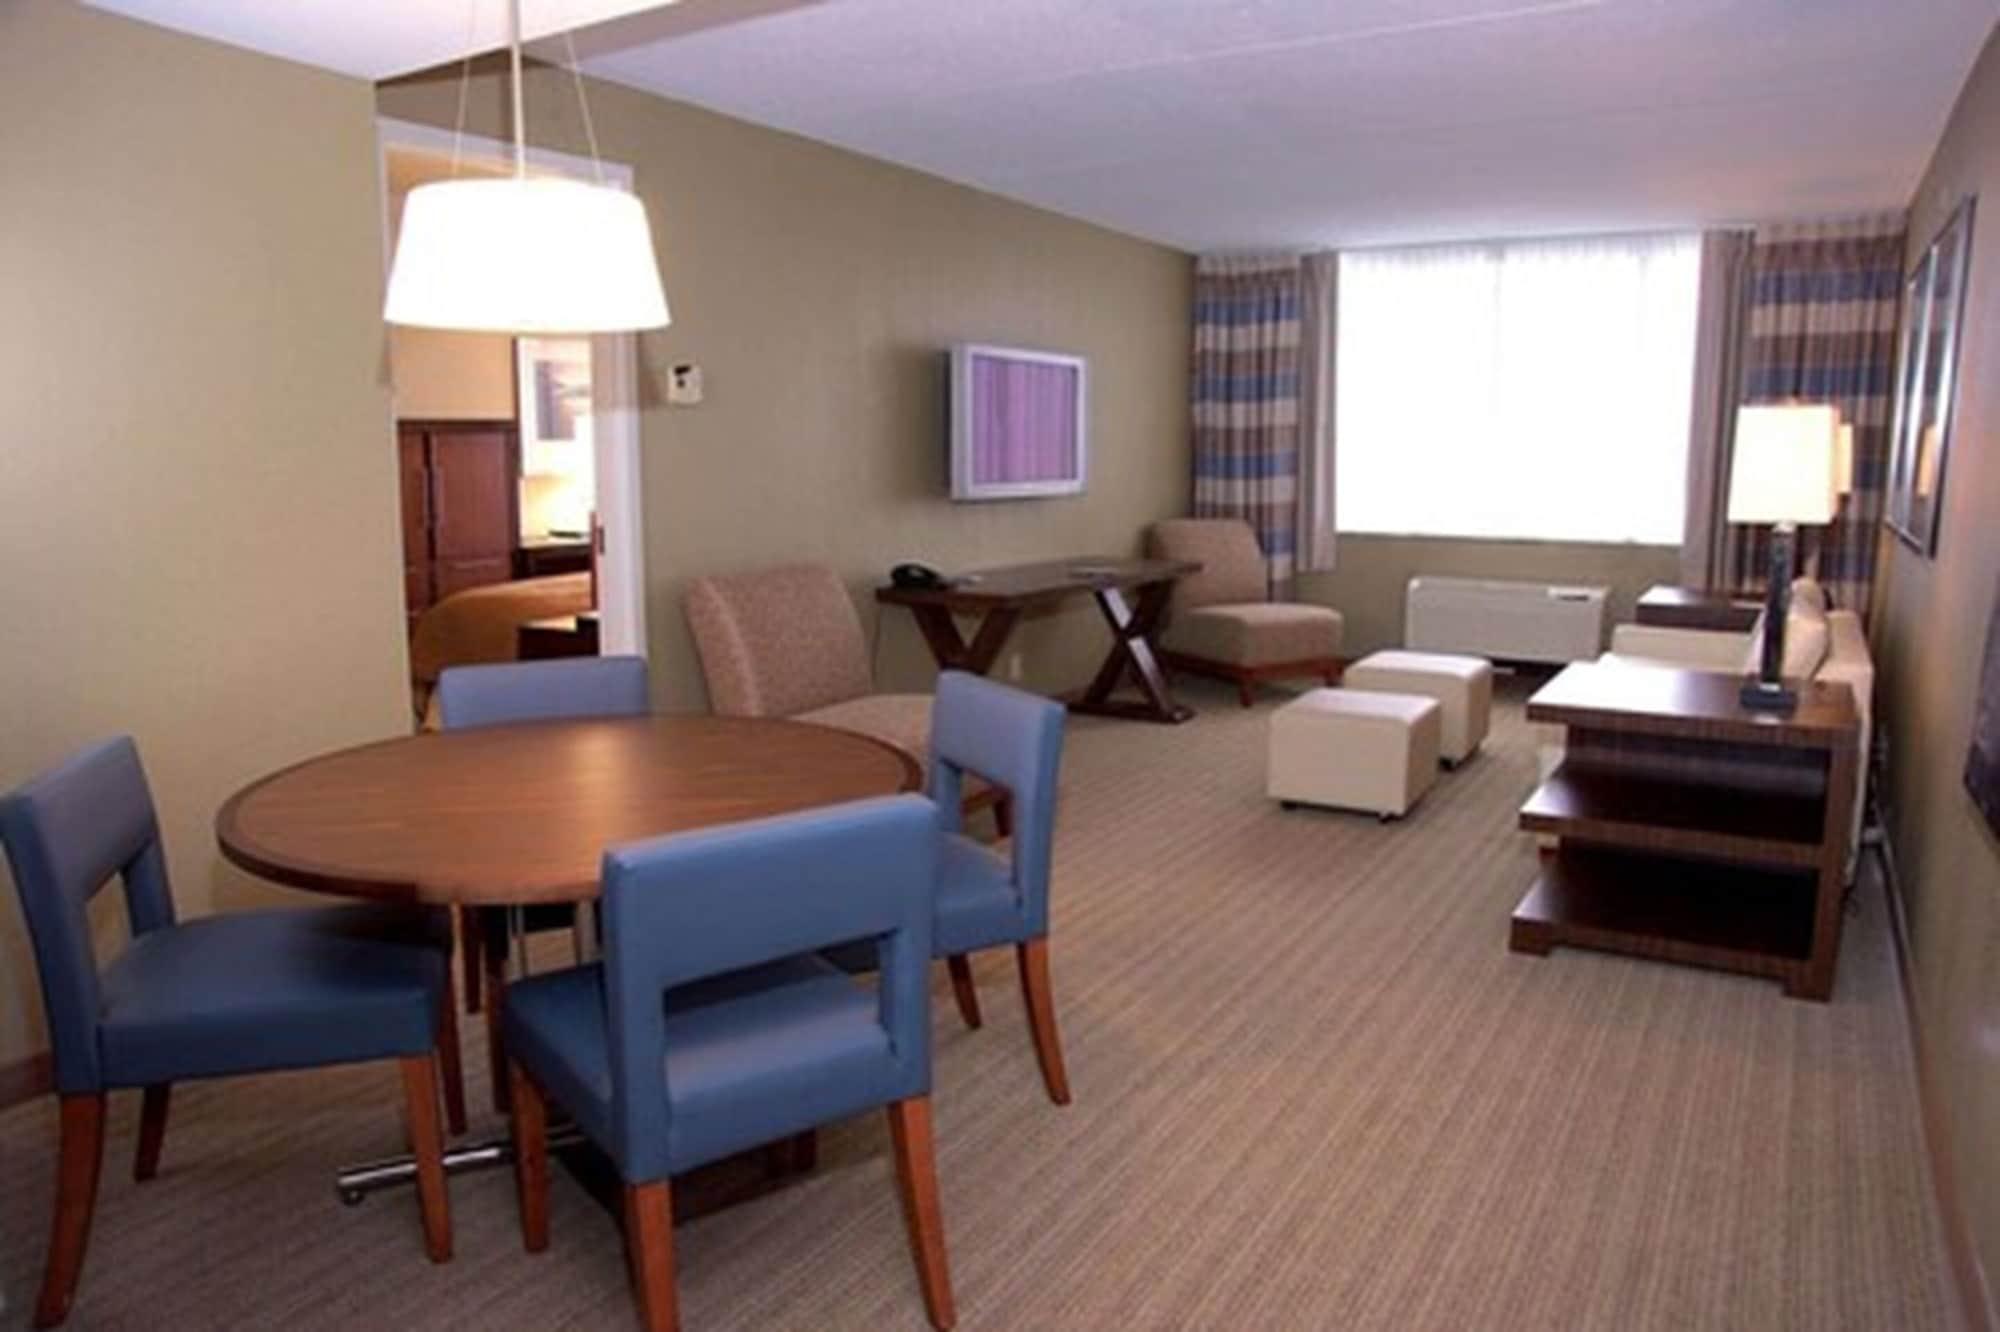 Doubletree By Hilton St. Louis At Westport Hotel Maryland Heights Room photo